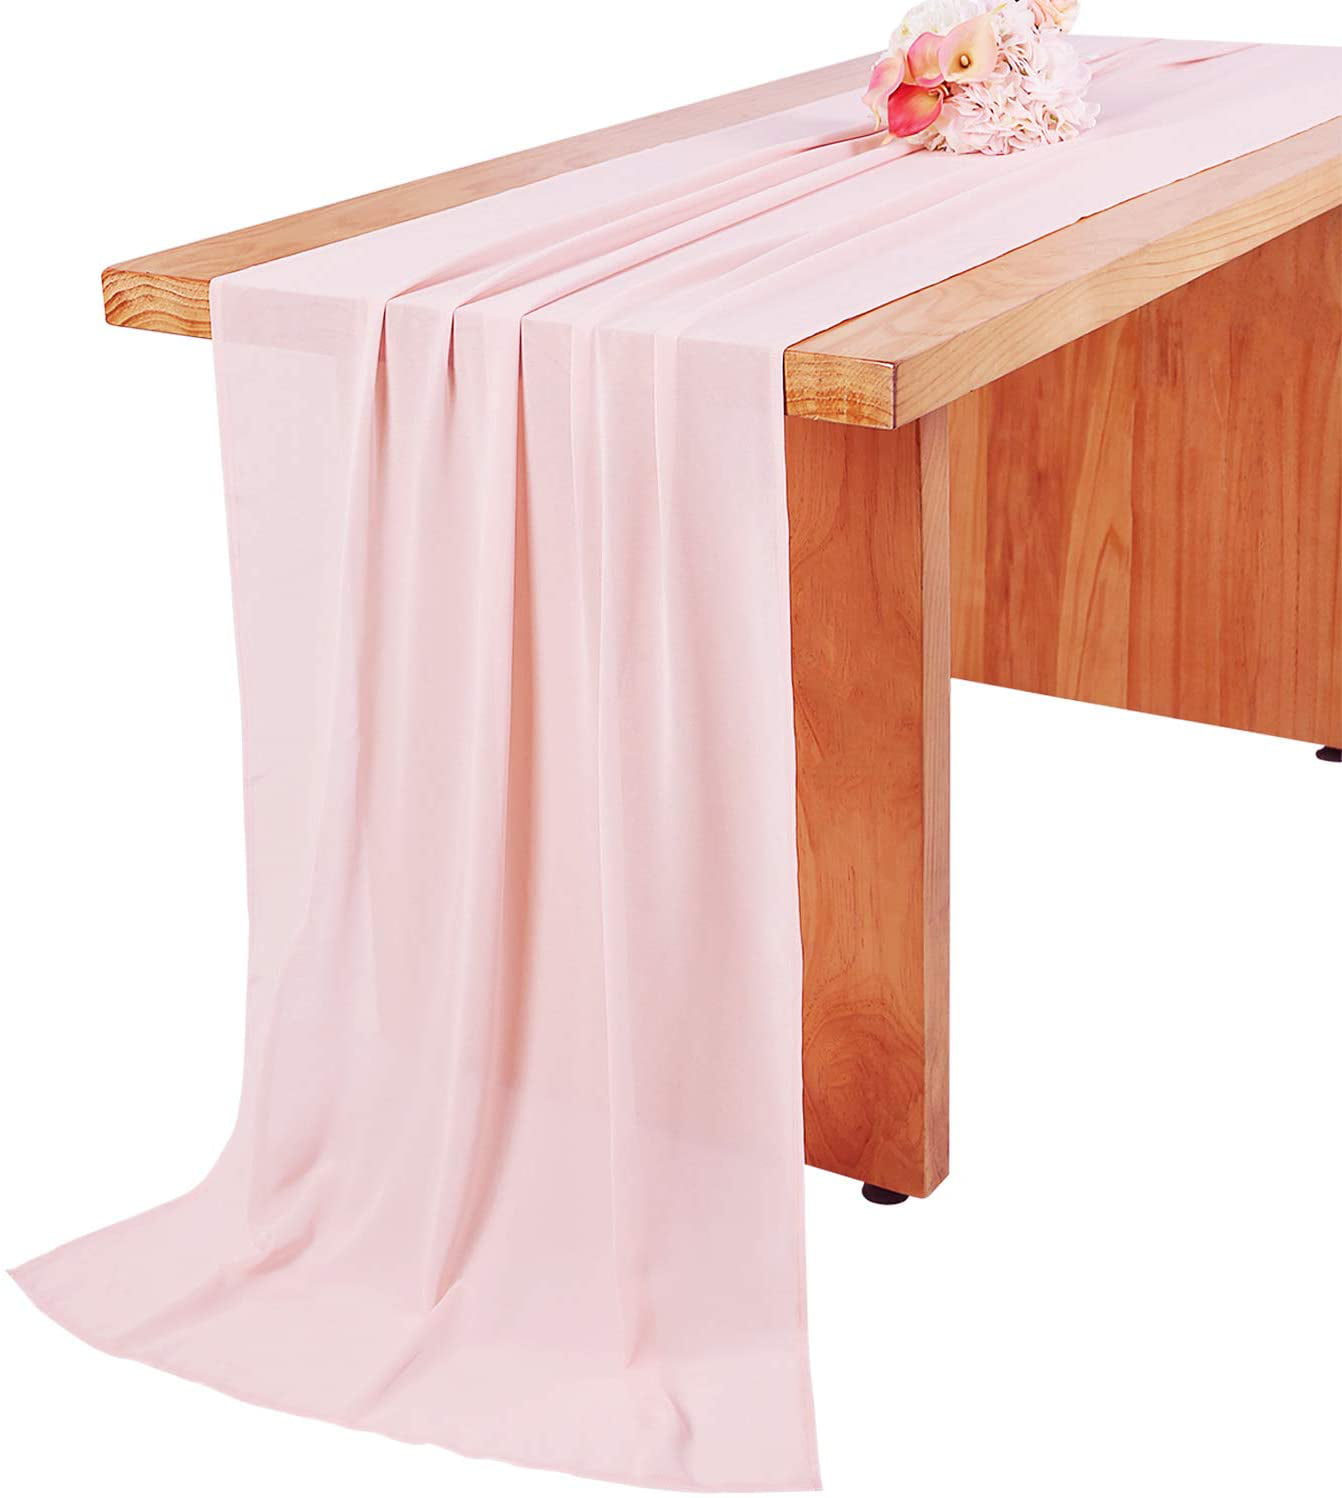 Bridal Shower Baby Shower Birthday Cake Table Decorations SHERWAY 27 x 120 Inch Burgundy Chiffon Wedding Table Runner Overlay Semi Sheer Table Runner for Wedding Party Decoration 